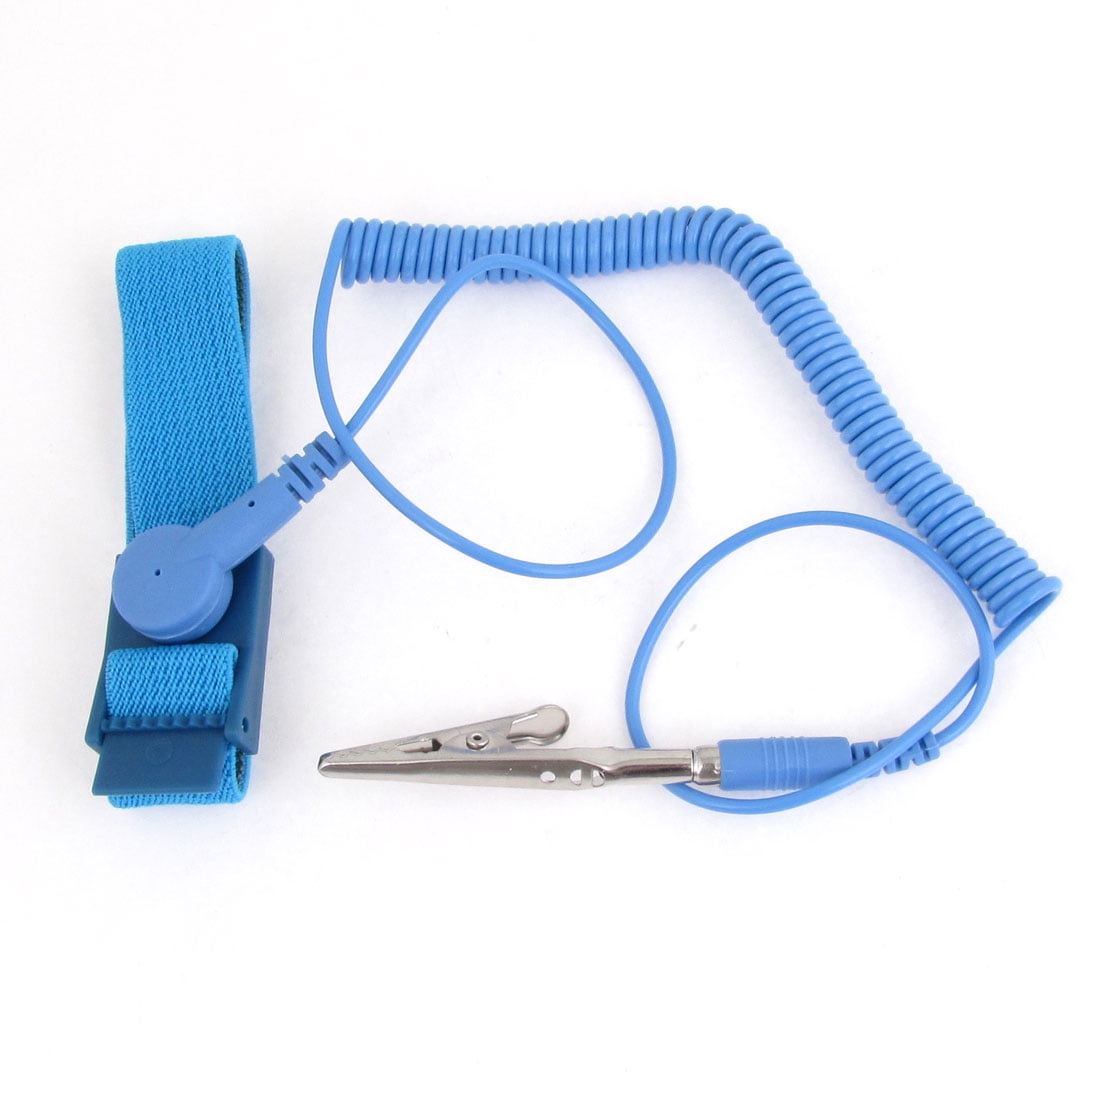 Super Offer Anti Static Wrist Strap Elastic Band with Clip for Sensitive Electro 